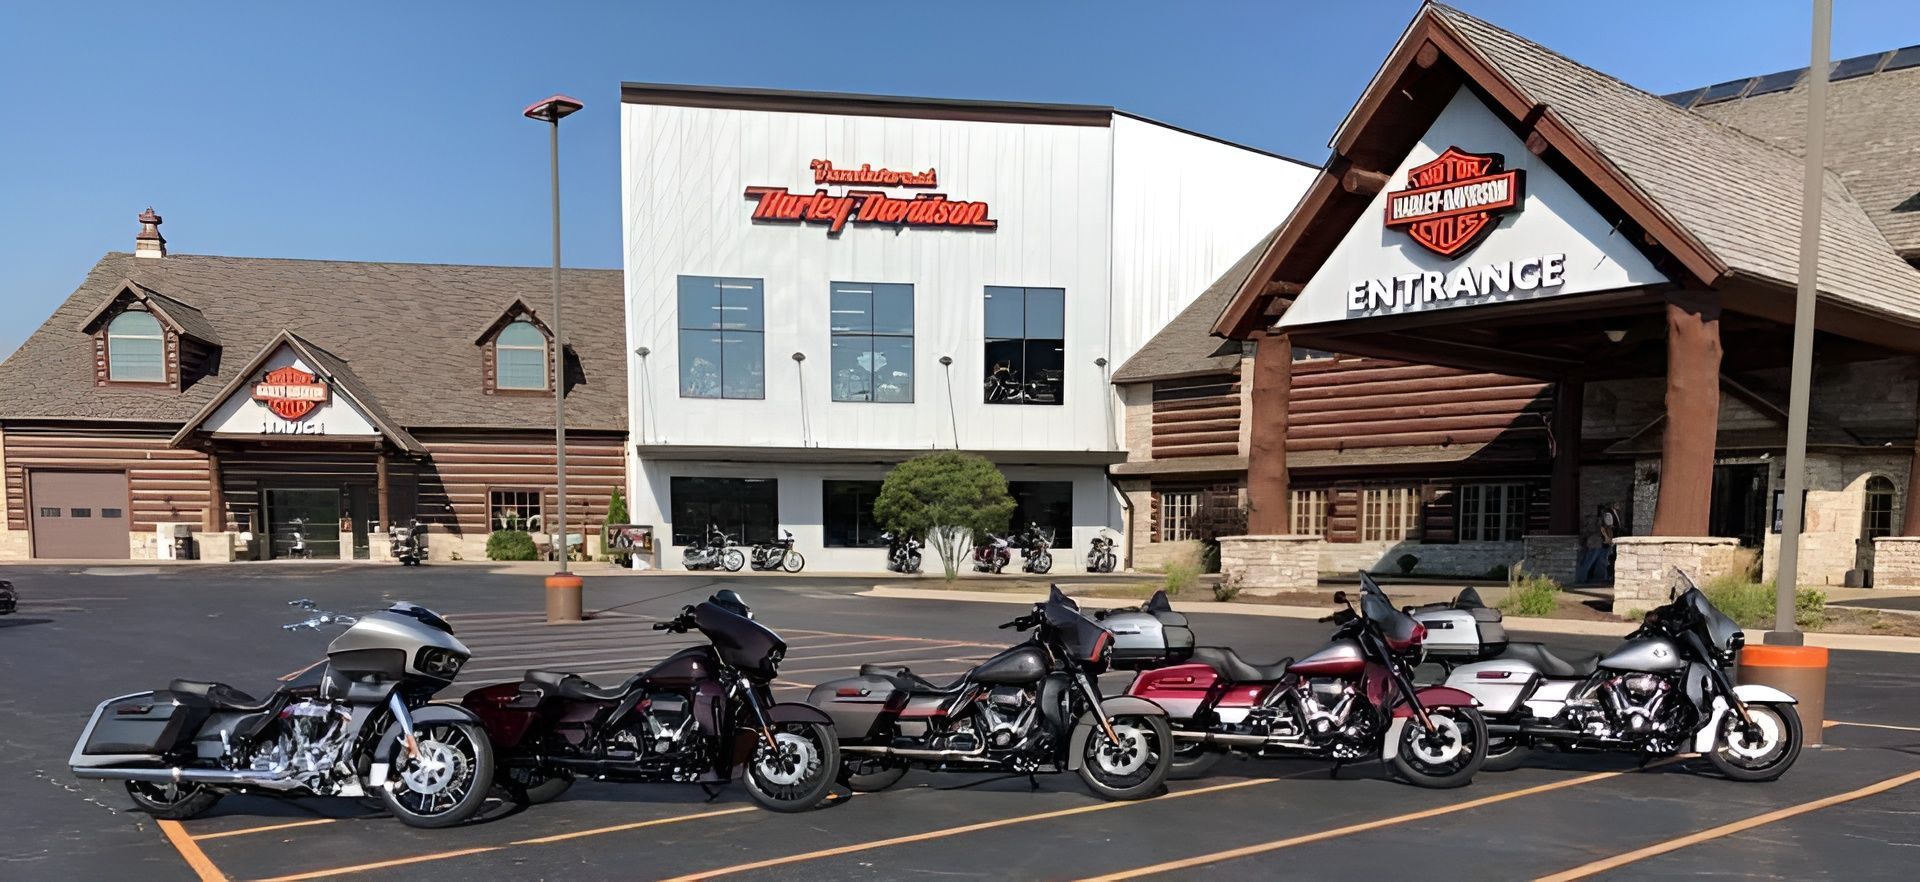 Green Bay Wisconsin Commercial Roofing Contractor - Badgerland Restoration & Remodeling - Fox Cities - Harley Davidson - Commercial Skylights - Oshkosh Wisconsin